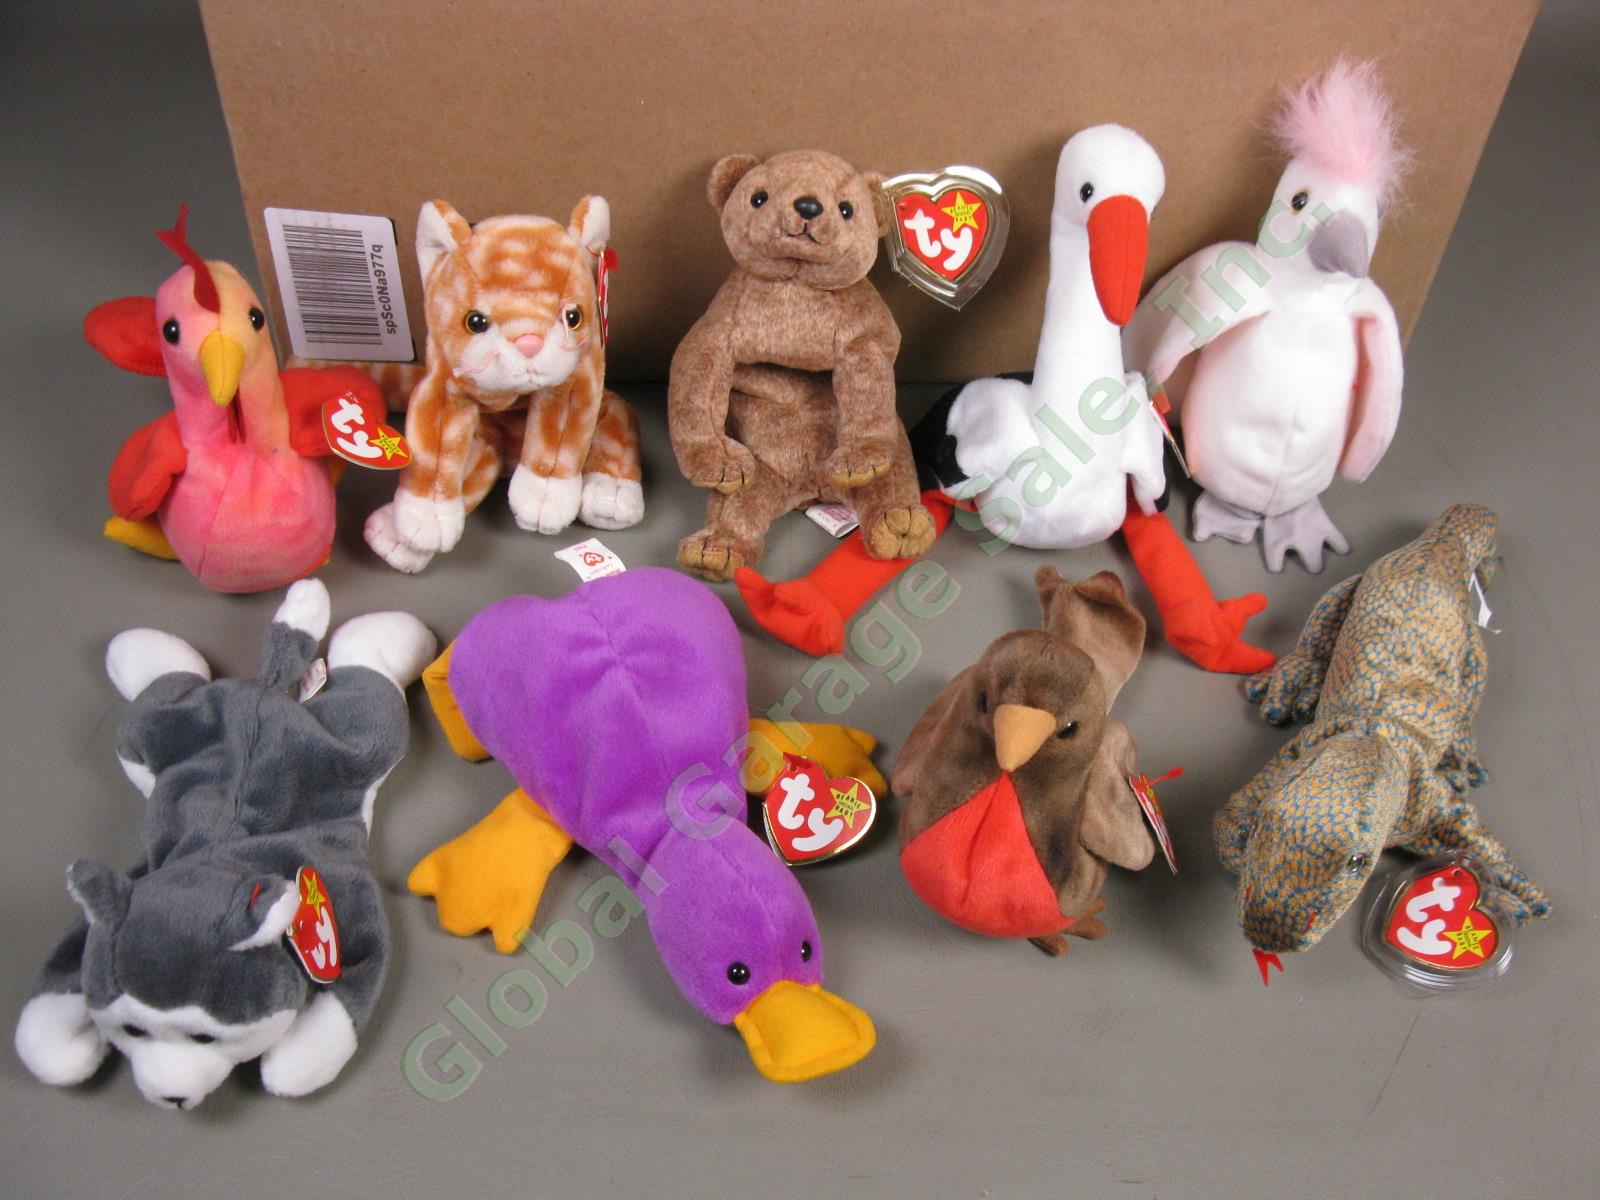 100 Vtg Ty Beanie Babies Lot All Different With Tags 1990s Hoppity Kuku Scaly ++ 1